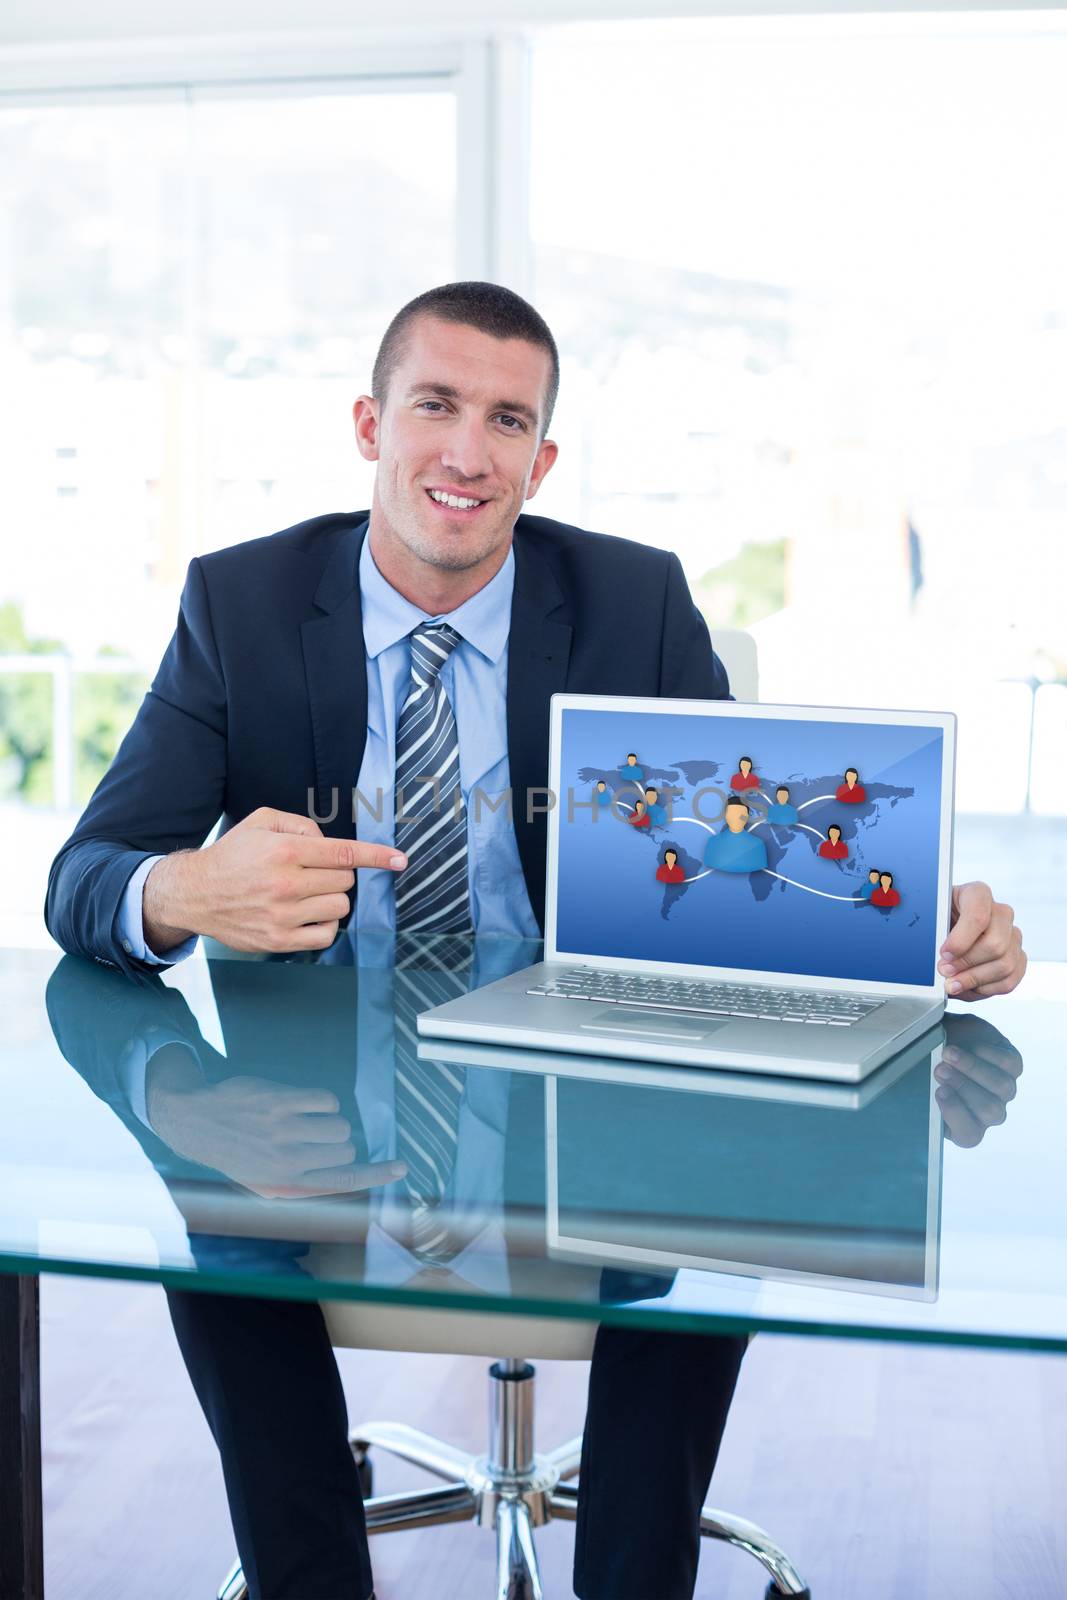 Smiling businessman pointing at laptop screen in office against communication between people from various continents